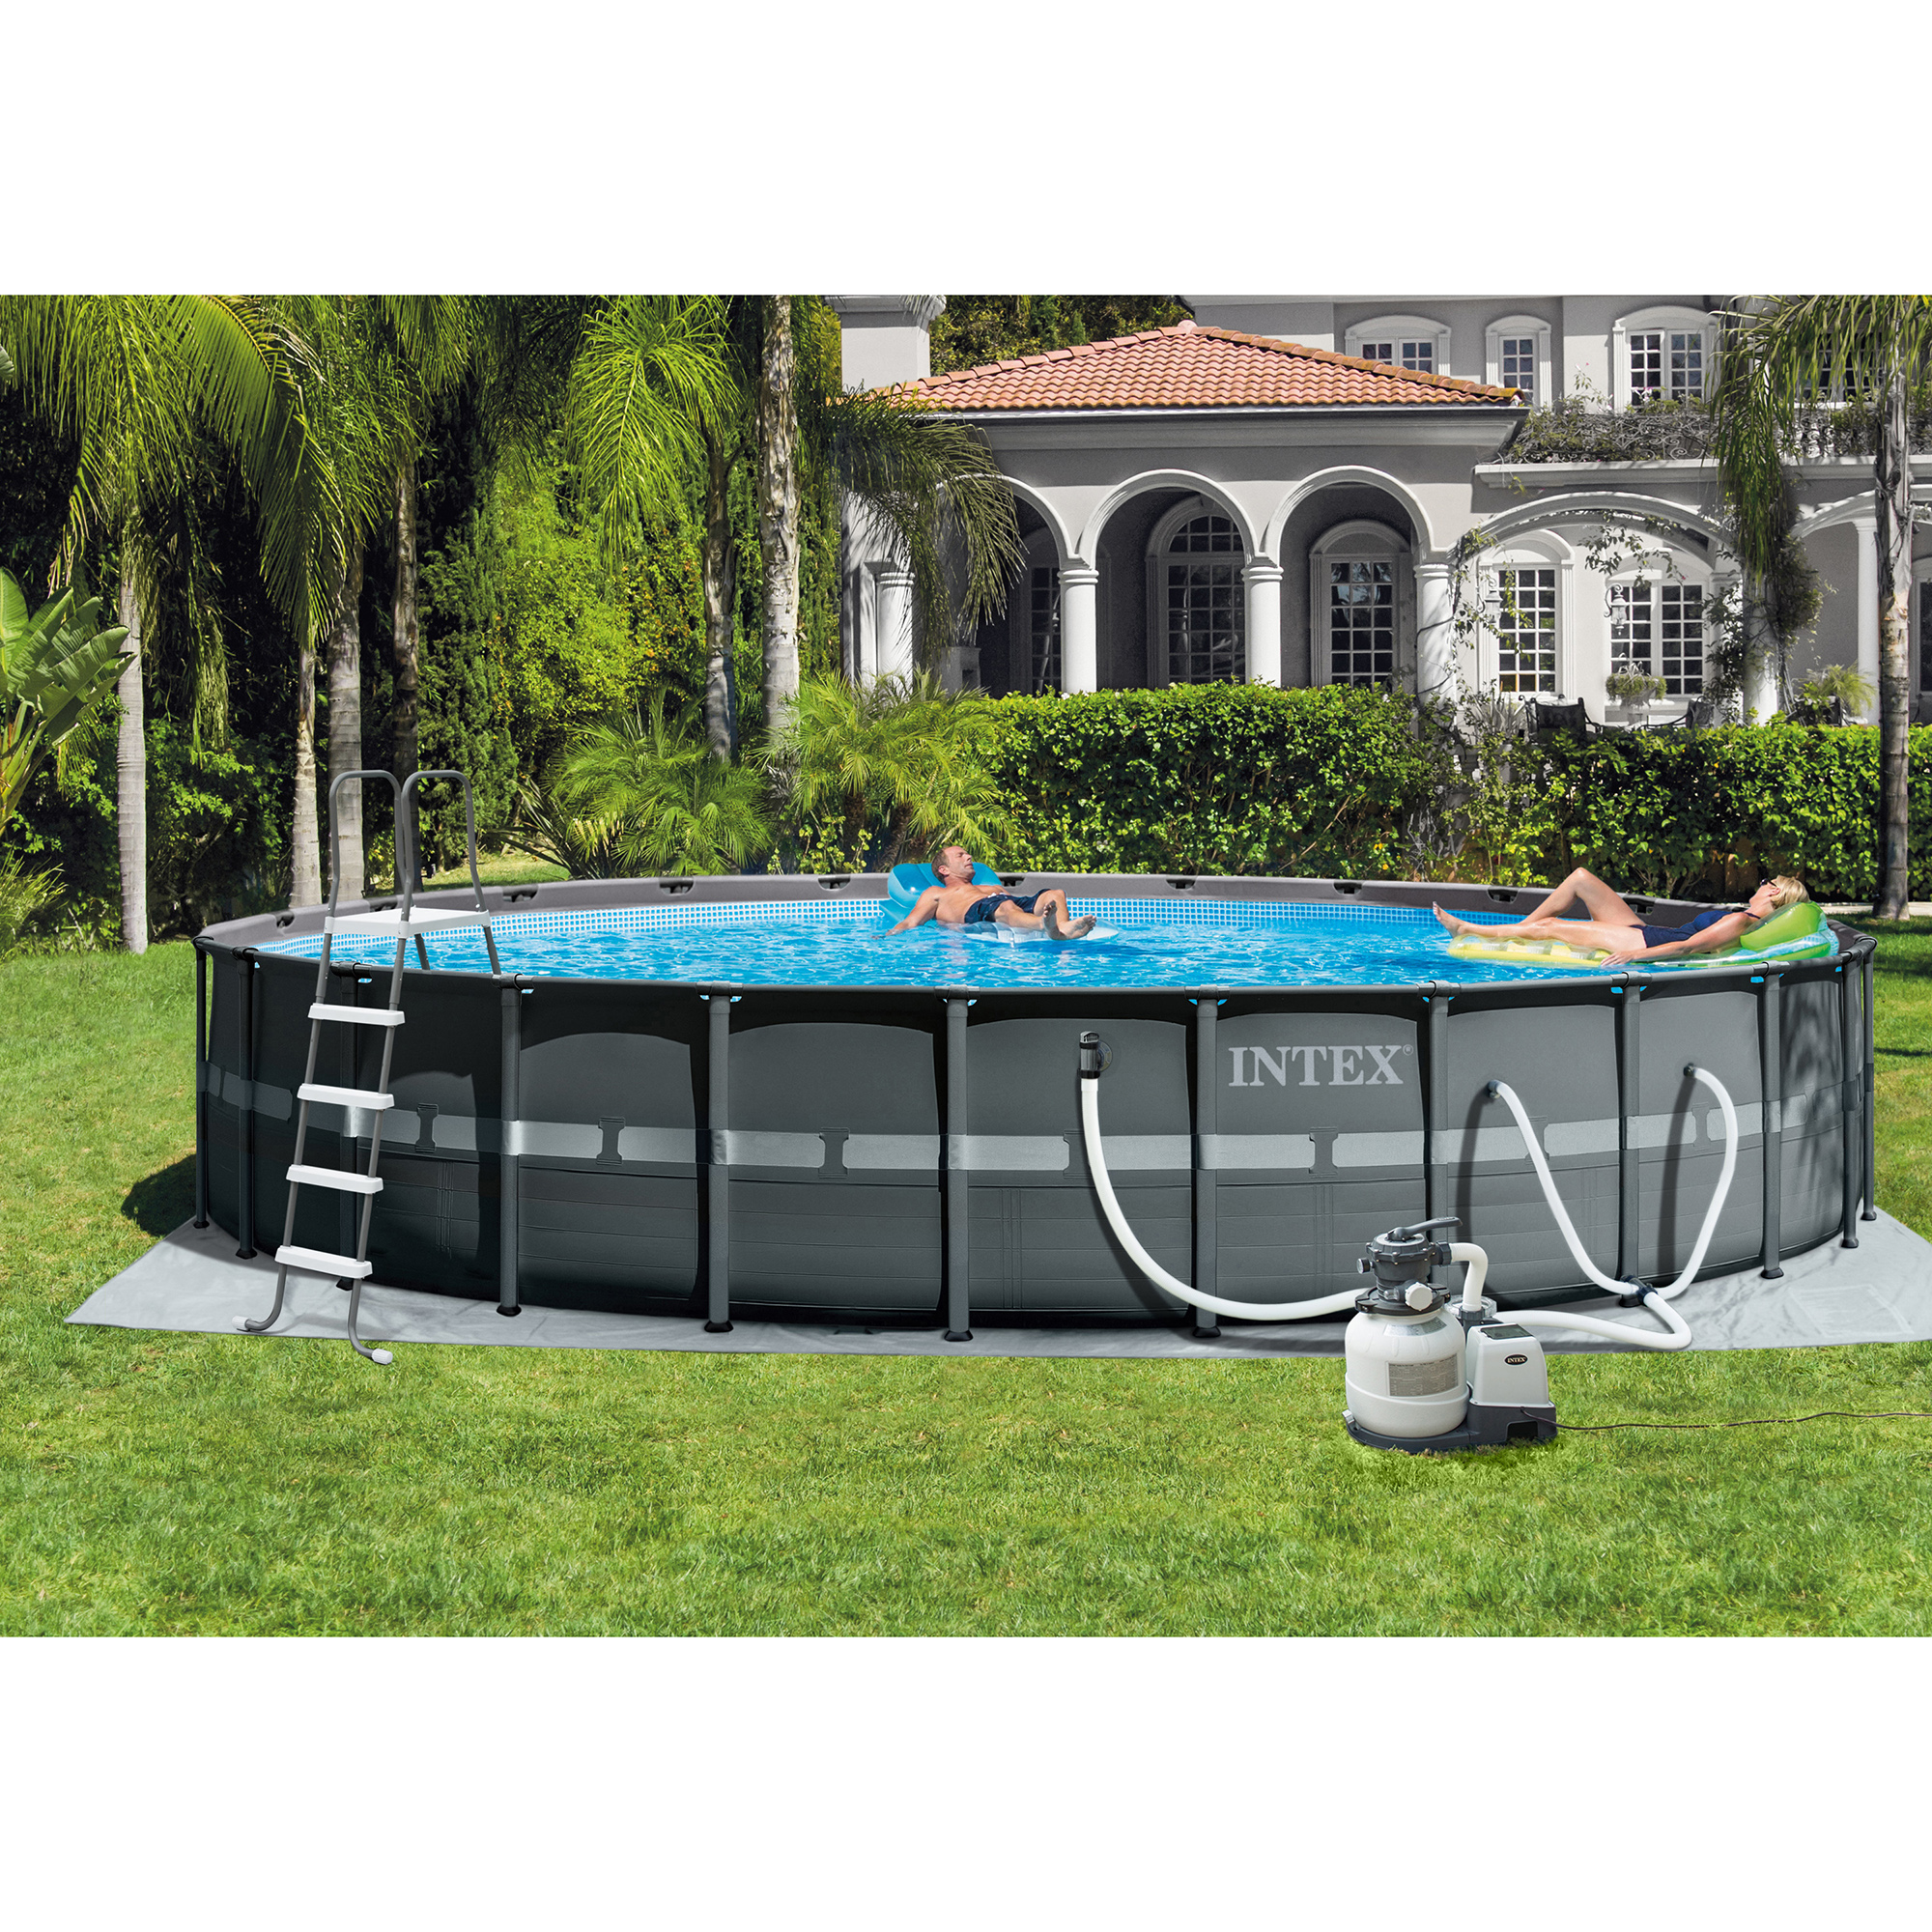 fencing for intex above ground pools